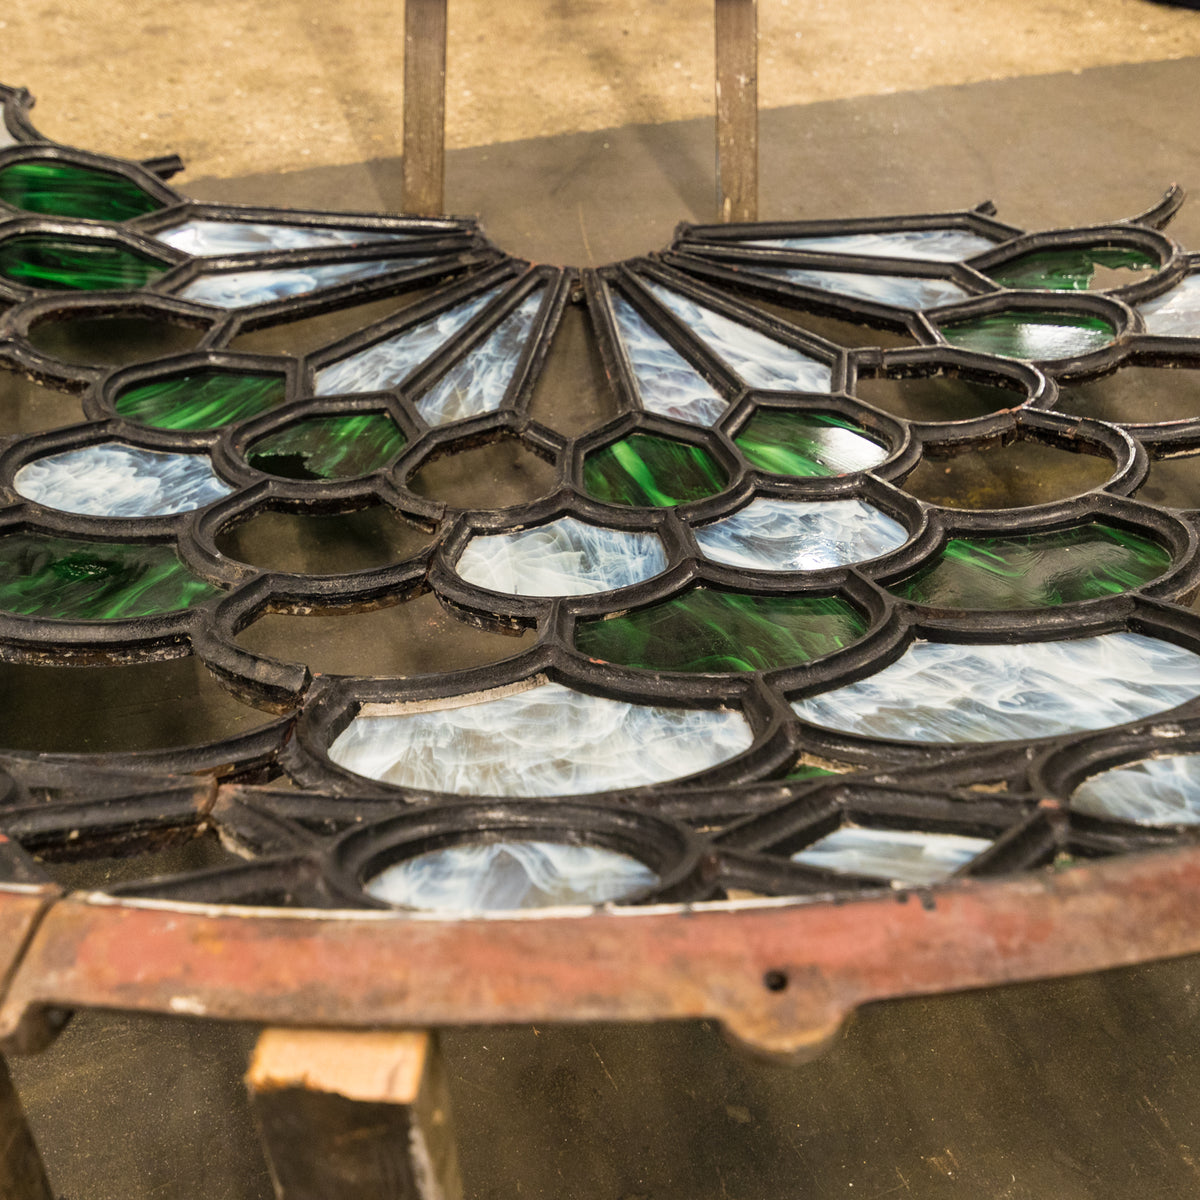 Magnificent Antique Domed Cast Iron Skylight with Stained Glass (3.5m) | The Architectural Forum